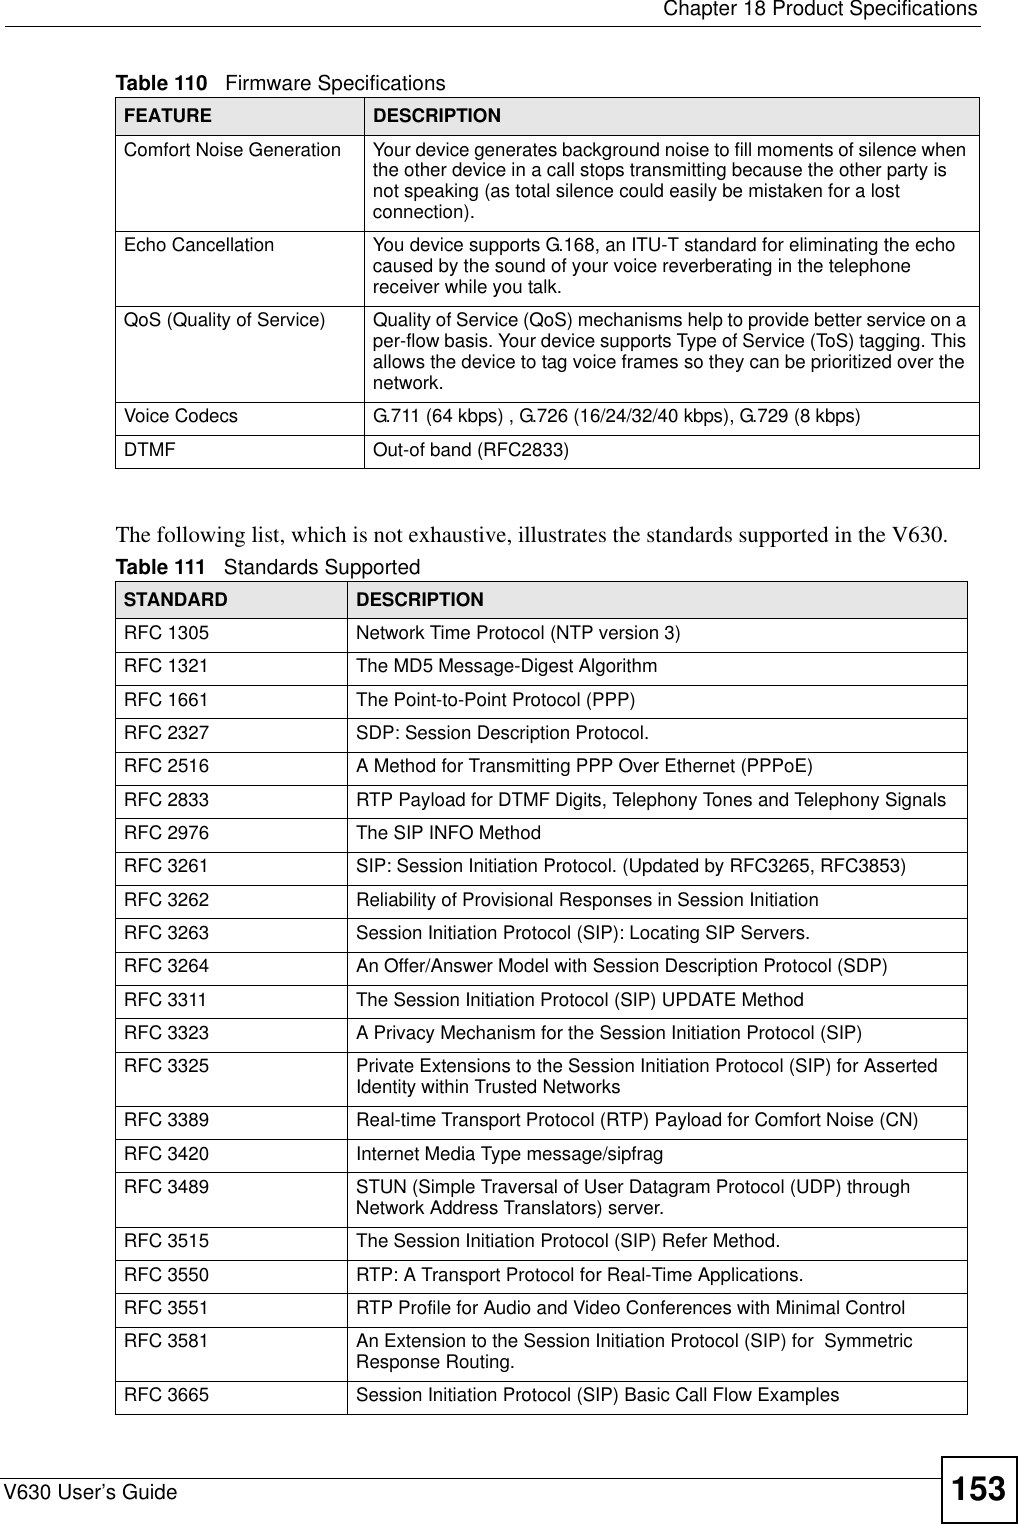  Chapter 18 Product SpecificationsV630 User’s Guide 153The following list, which is not exhaustive, illustrates the standards supported in the V630.Comfort Noise Generation Your device generates background noise to fill moments of silence when the other device in a call stops transmitting because the other party is not speaking (as total silence could easily be mistaken for a lost connection). Echo Cancellation  You device supports G.168, an ITU-T standard for eliminating the echo caused by the sound of your voice reverberating in the telephone receiver while you talk.QoS (Quality of Service)  Quality of Service (QoS) mechanisms help to provide better service on a per-flow basis. Your device supports Type of Service (ToS) tagging. This allows the device to tag voice frames so they can be prioritized over the network.Voice Codecs G.711 (64 kbps) , G.726 (16/24/32/40 kbps), G.729 (8 kbps)DTMF Out-of band (RFC2833)Table 111   Standards Supported STANDARD DESCRIPTIONRFC 1305 Network Time Protocol (NTP version 3)RFC 1321 The MD5 Message-Digest AlgorithmRFC 1661 The Point-to-Point Protocol (PPP)RFC 2327 SDP: Session Description Protocol. RFC 2516 A Method for Transmitting PPP Over Ethernet (PPPoE)RFC 2833 RTP Payload for DTMF Digits, Telephony Tones and Telephony SignalsRFC 2976 The SIP INFO MethodRFC 3261 SIP: Session Initiation Protocol. (Updated by RFC3265, RFC3853)RFC 3262 Reliability of Provisional Responses in Session InitiationRFC 3263 Session Initiation Protocol (SIP): Locating SIP Servers.RFC 3264 An Offer/Answer Model with Session Description Protocol (SDP)RFC 3311 The Session Initiation Protocol (SIP) UPDATE MethodRFC 3323 A Privacy Mechanism for the Session Initiation Protocol (SIP) RFC 3325 Private Extensions to the Session Initiation Protocol (SIP) for Asserted Identity within Trusted Networks RFC 3389 Real-time Transport Protocol (RTP) Payload for Comfort Noise (CN)RFC 3420 Internet Media Type message/sipfrag RFC 3489 STUN (Simple Traversal of User Datagram Protocol (UDP) through Network Address Translators) server.RFC 3515 The Session Initiation Protocol (SIP) Refer Method.RFC 3550 RTP: A Transport Protocol for Real-Time Applications.RFC 3551 RTP Profile for Audio and Video Conferences with Minimal ControlRFC 3581 An Extension to the Session Initiation Protocol (SIP) for  Symmetric Response Routing.RFC 3665 Session Initiation Protocol (SIP) Basic Call Flow ExamplesTable 110   Firmware Specifications FEATURE DESCRIPTION